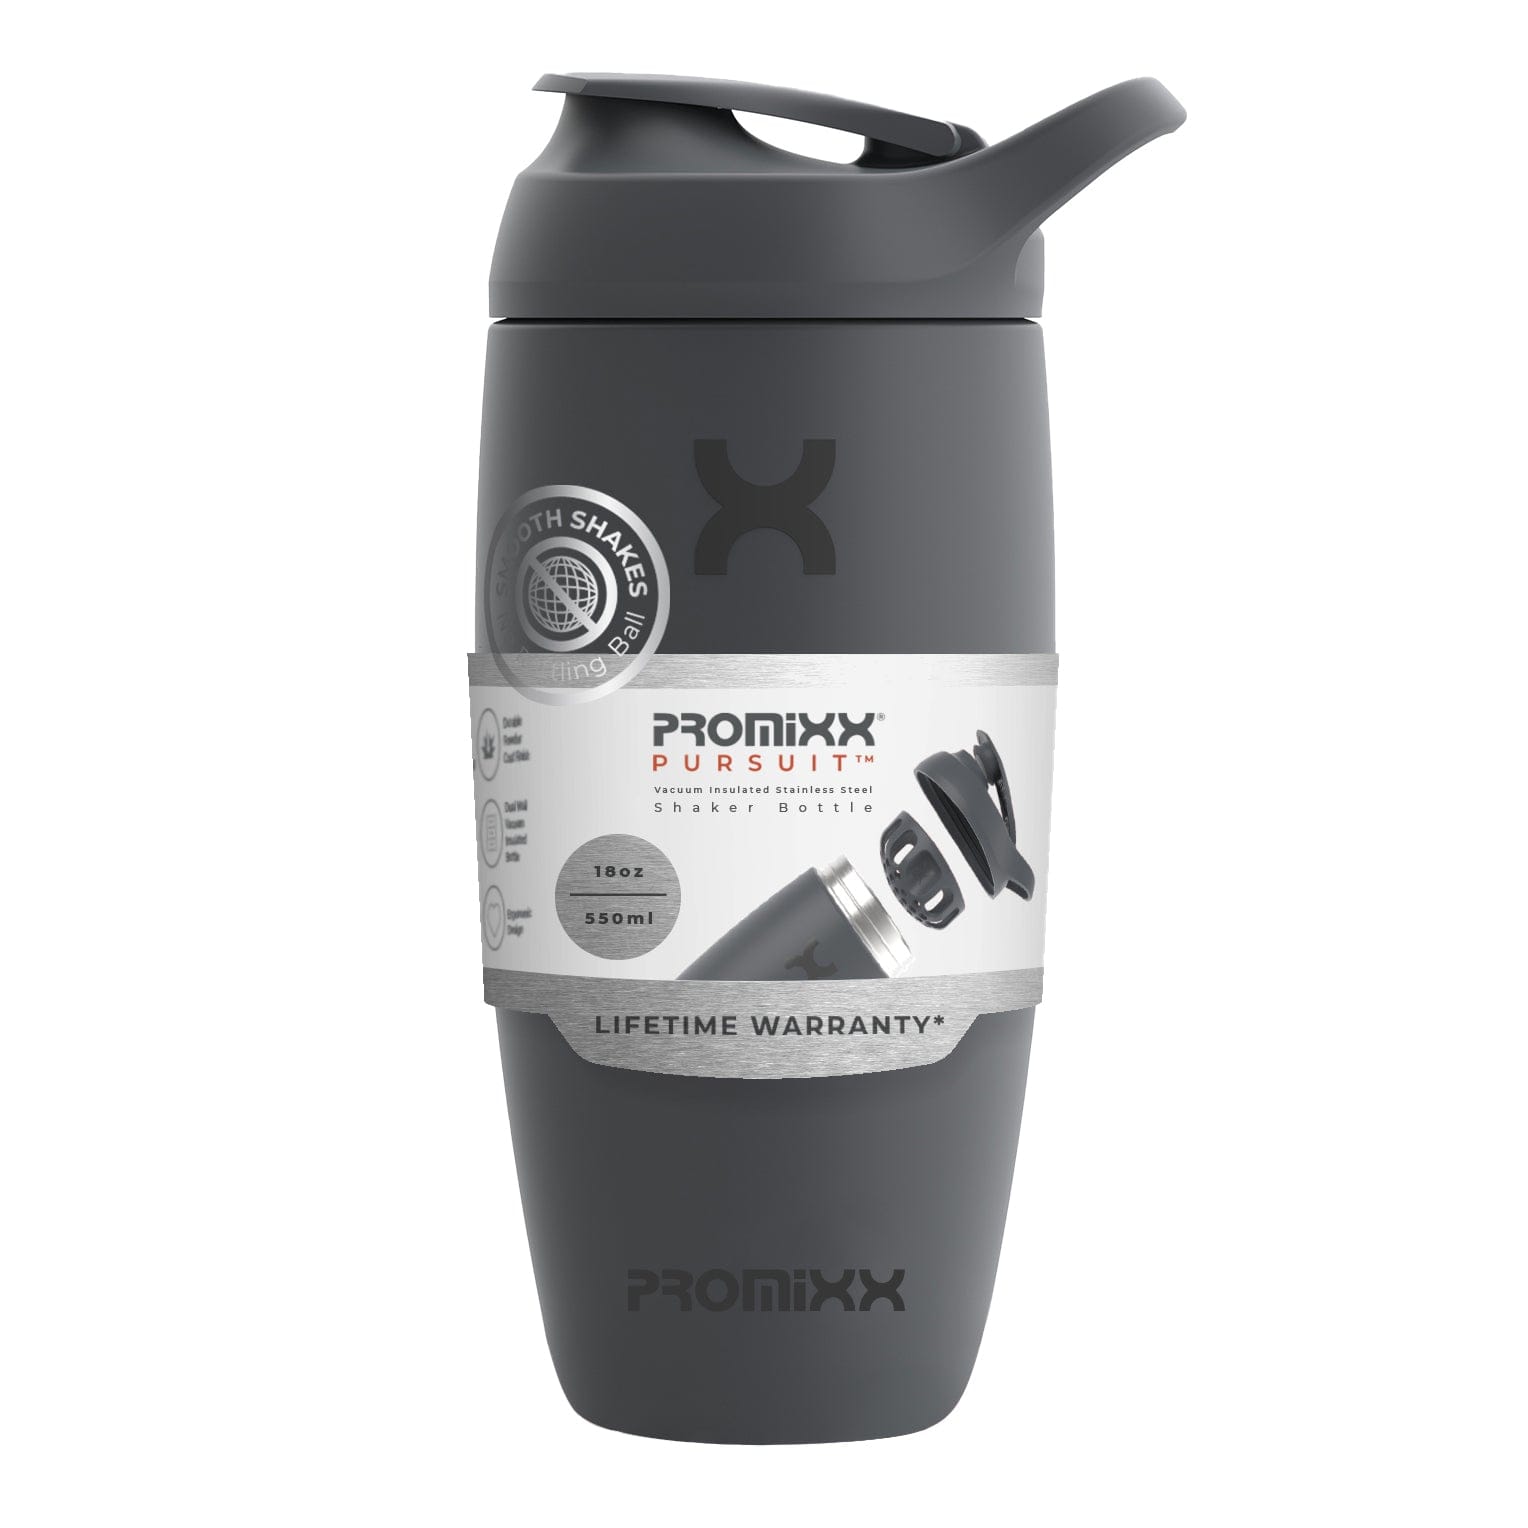 PROMiXX Blender Review & Smoothie Recipe